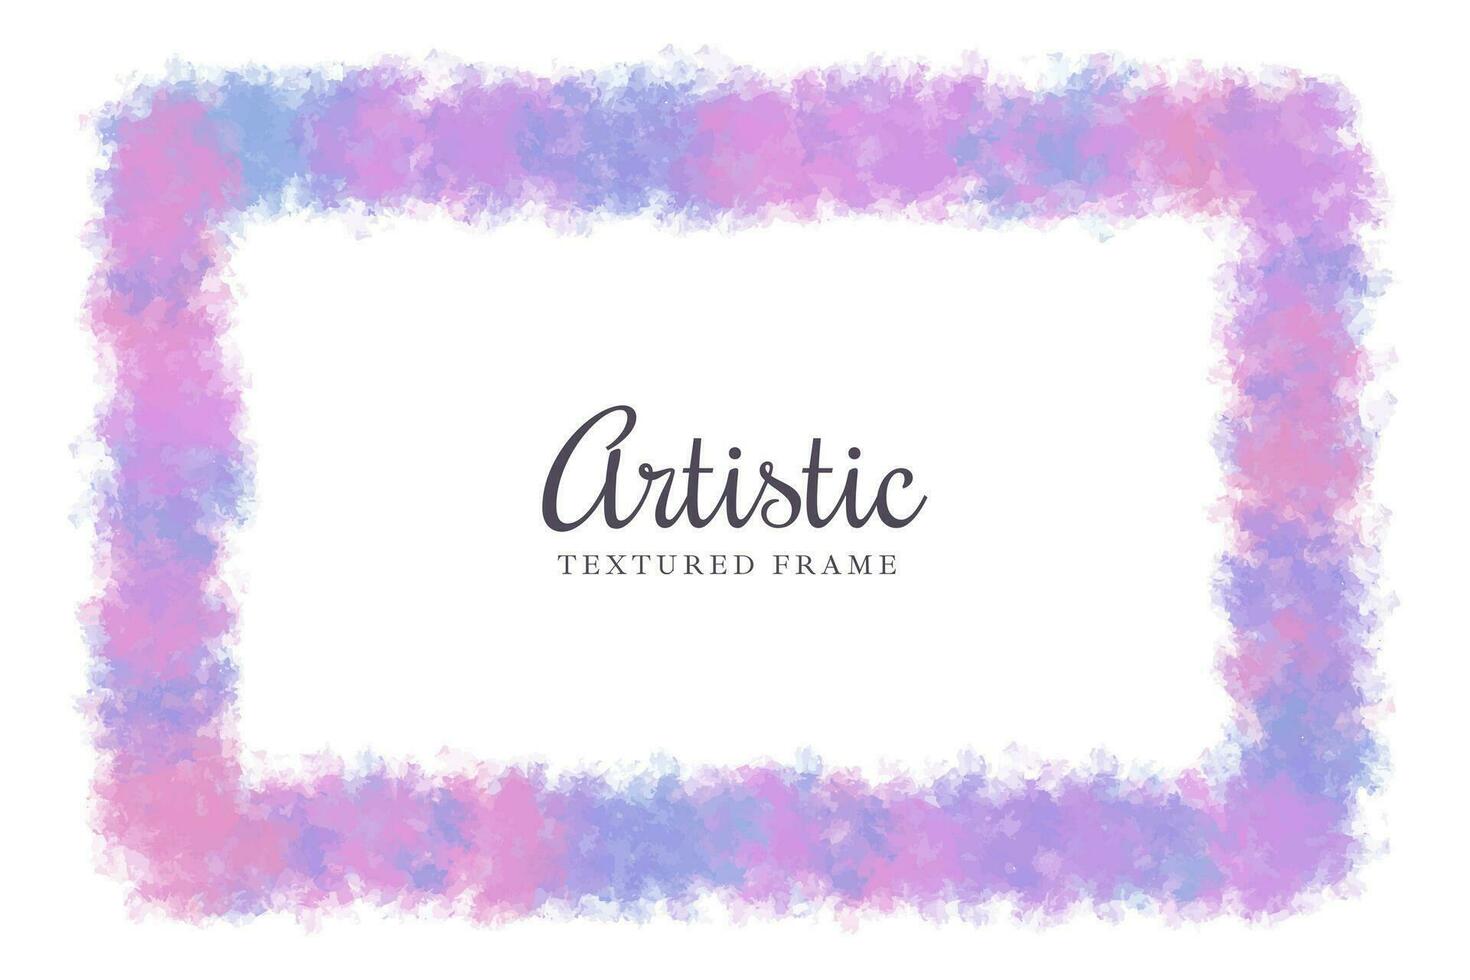 Artistic brush textured paint colorful frame vector